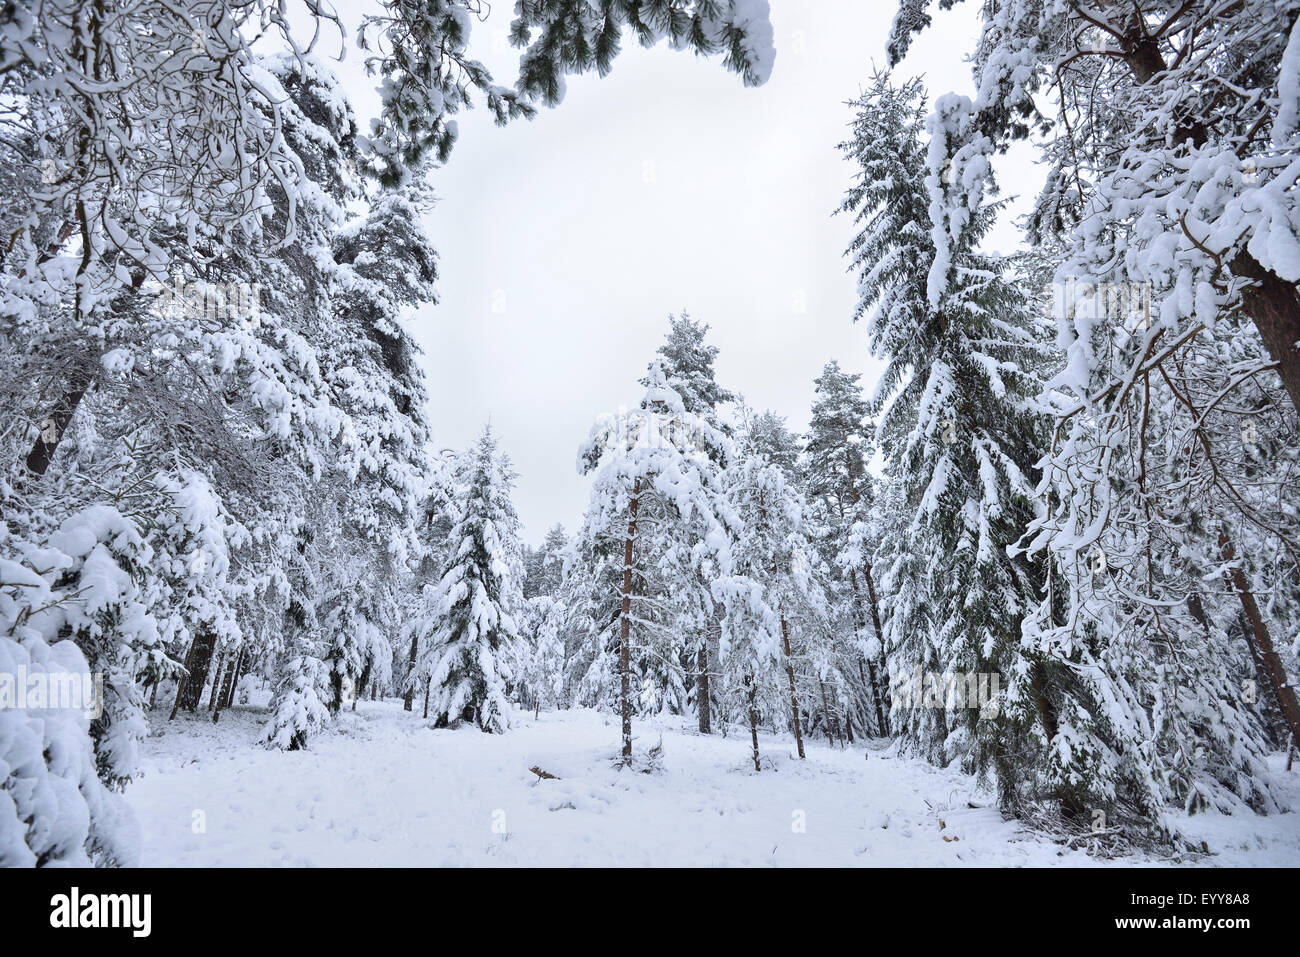 Norway spruce (Picea abies), snowy Norway spruce forest in winter, Germany, Bavaria Stock Photo